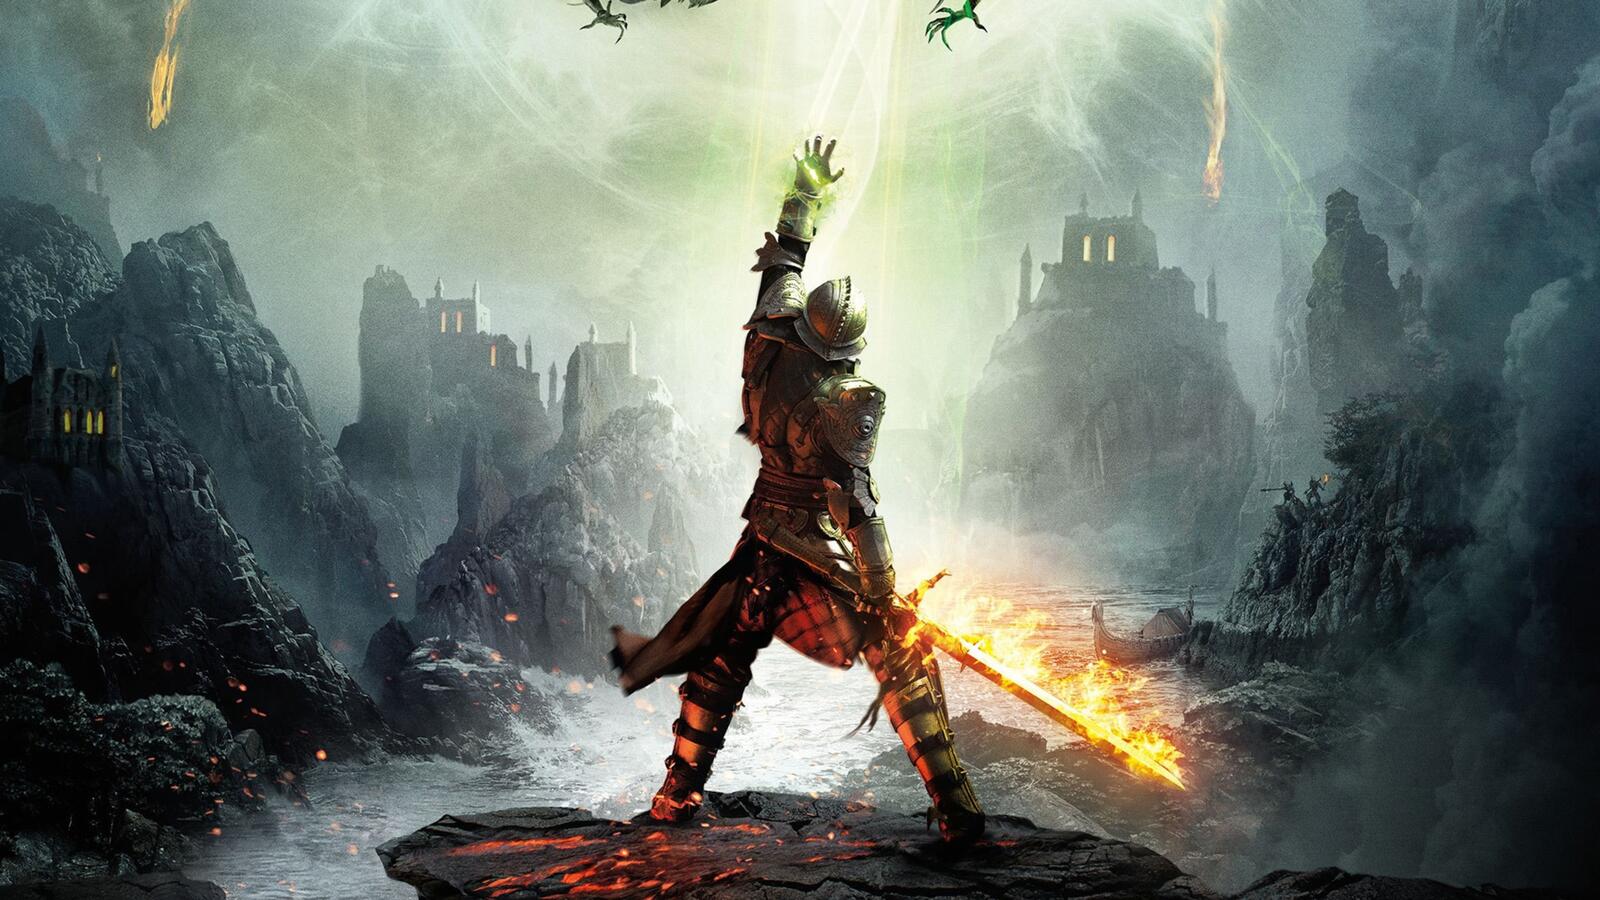 Wallpapers dragon age inquisition games films on the desktop